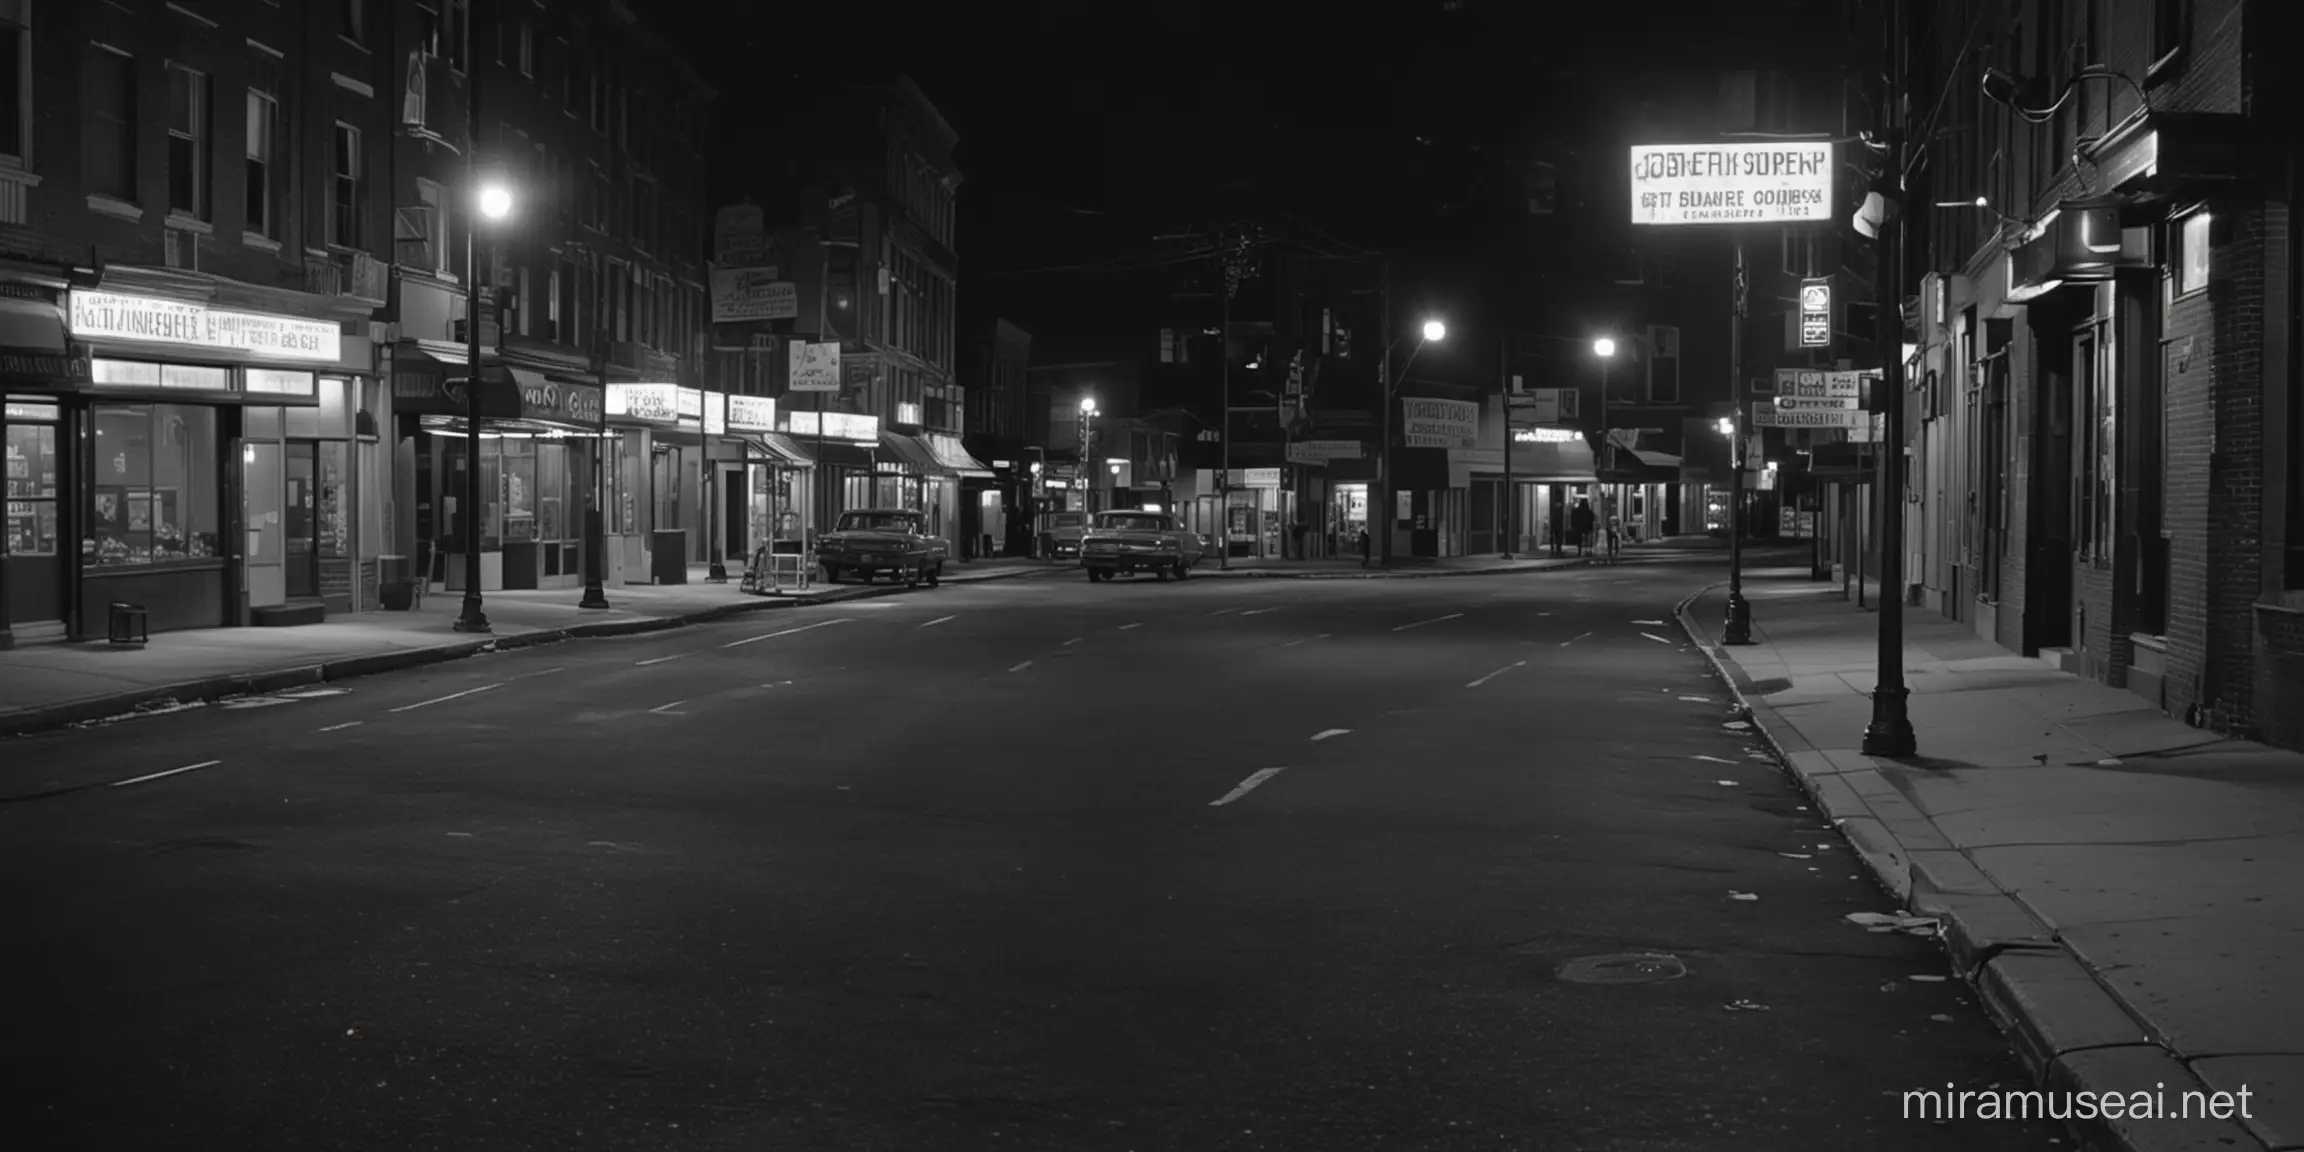 New Jersey Street at night 1960s. Centred. no people. Facing the sidewalk



